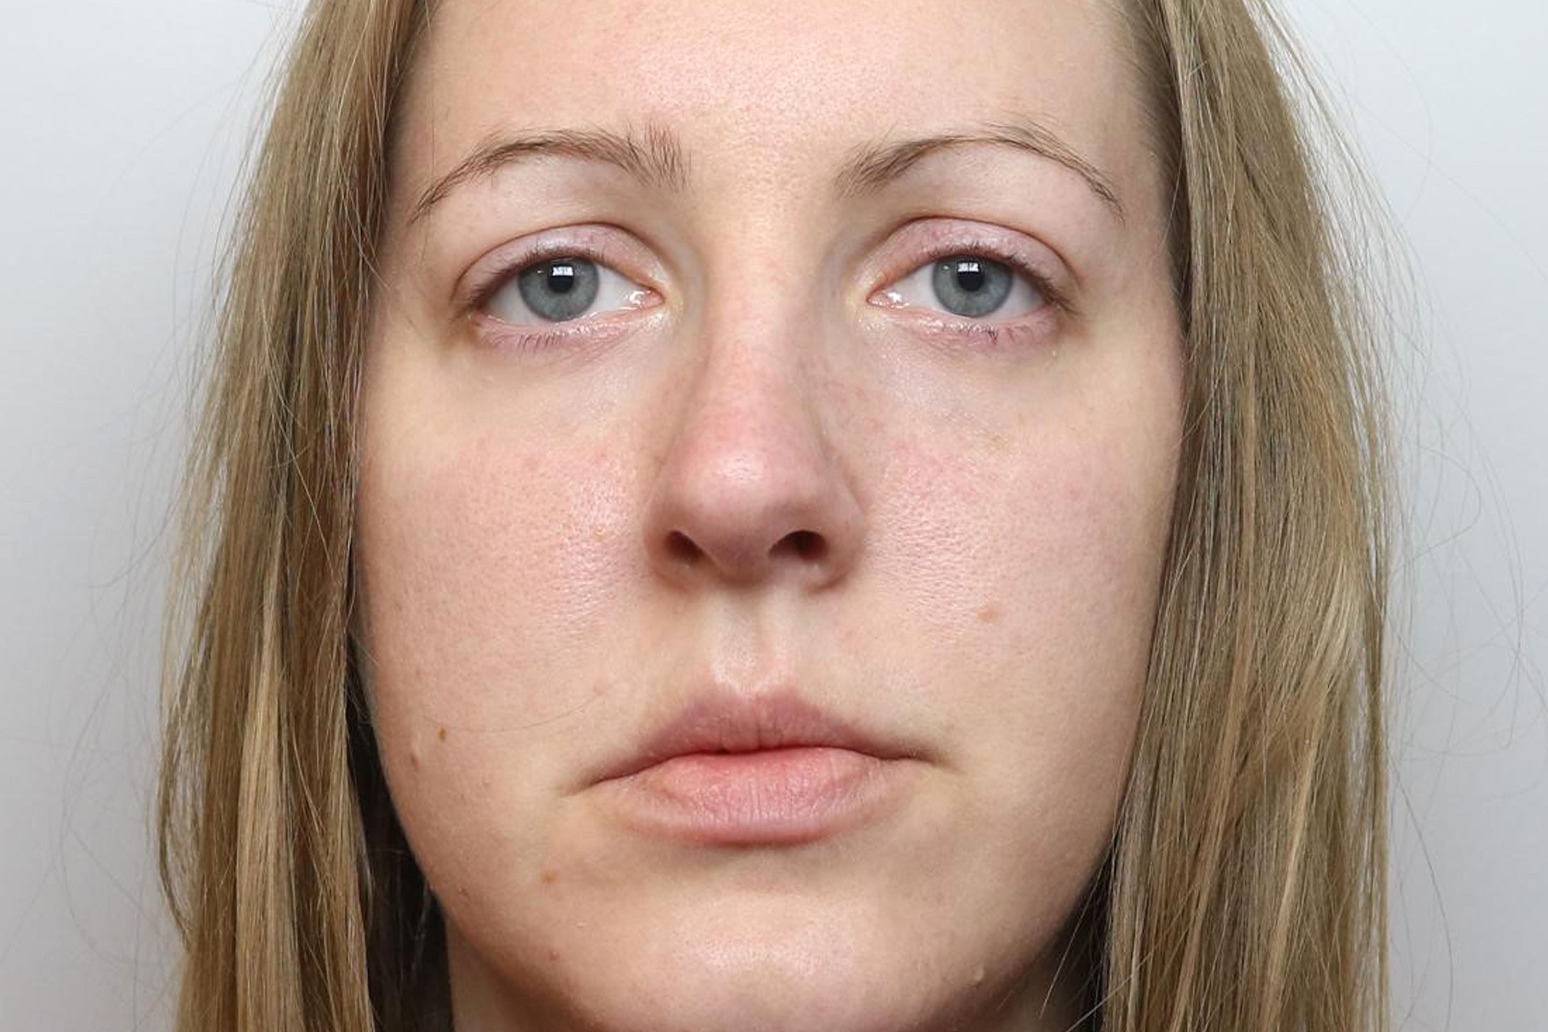 Baby murderer Lucy Letby to spend rest of her life in jail for ‘evil’ crimes 